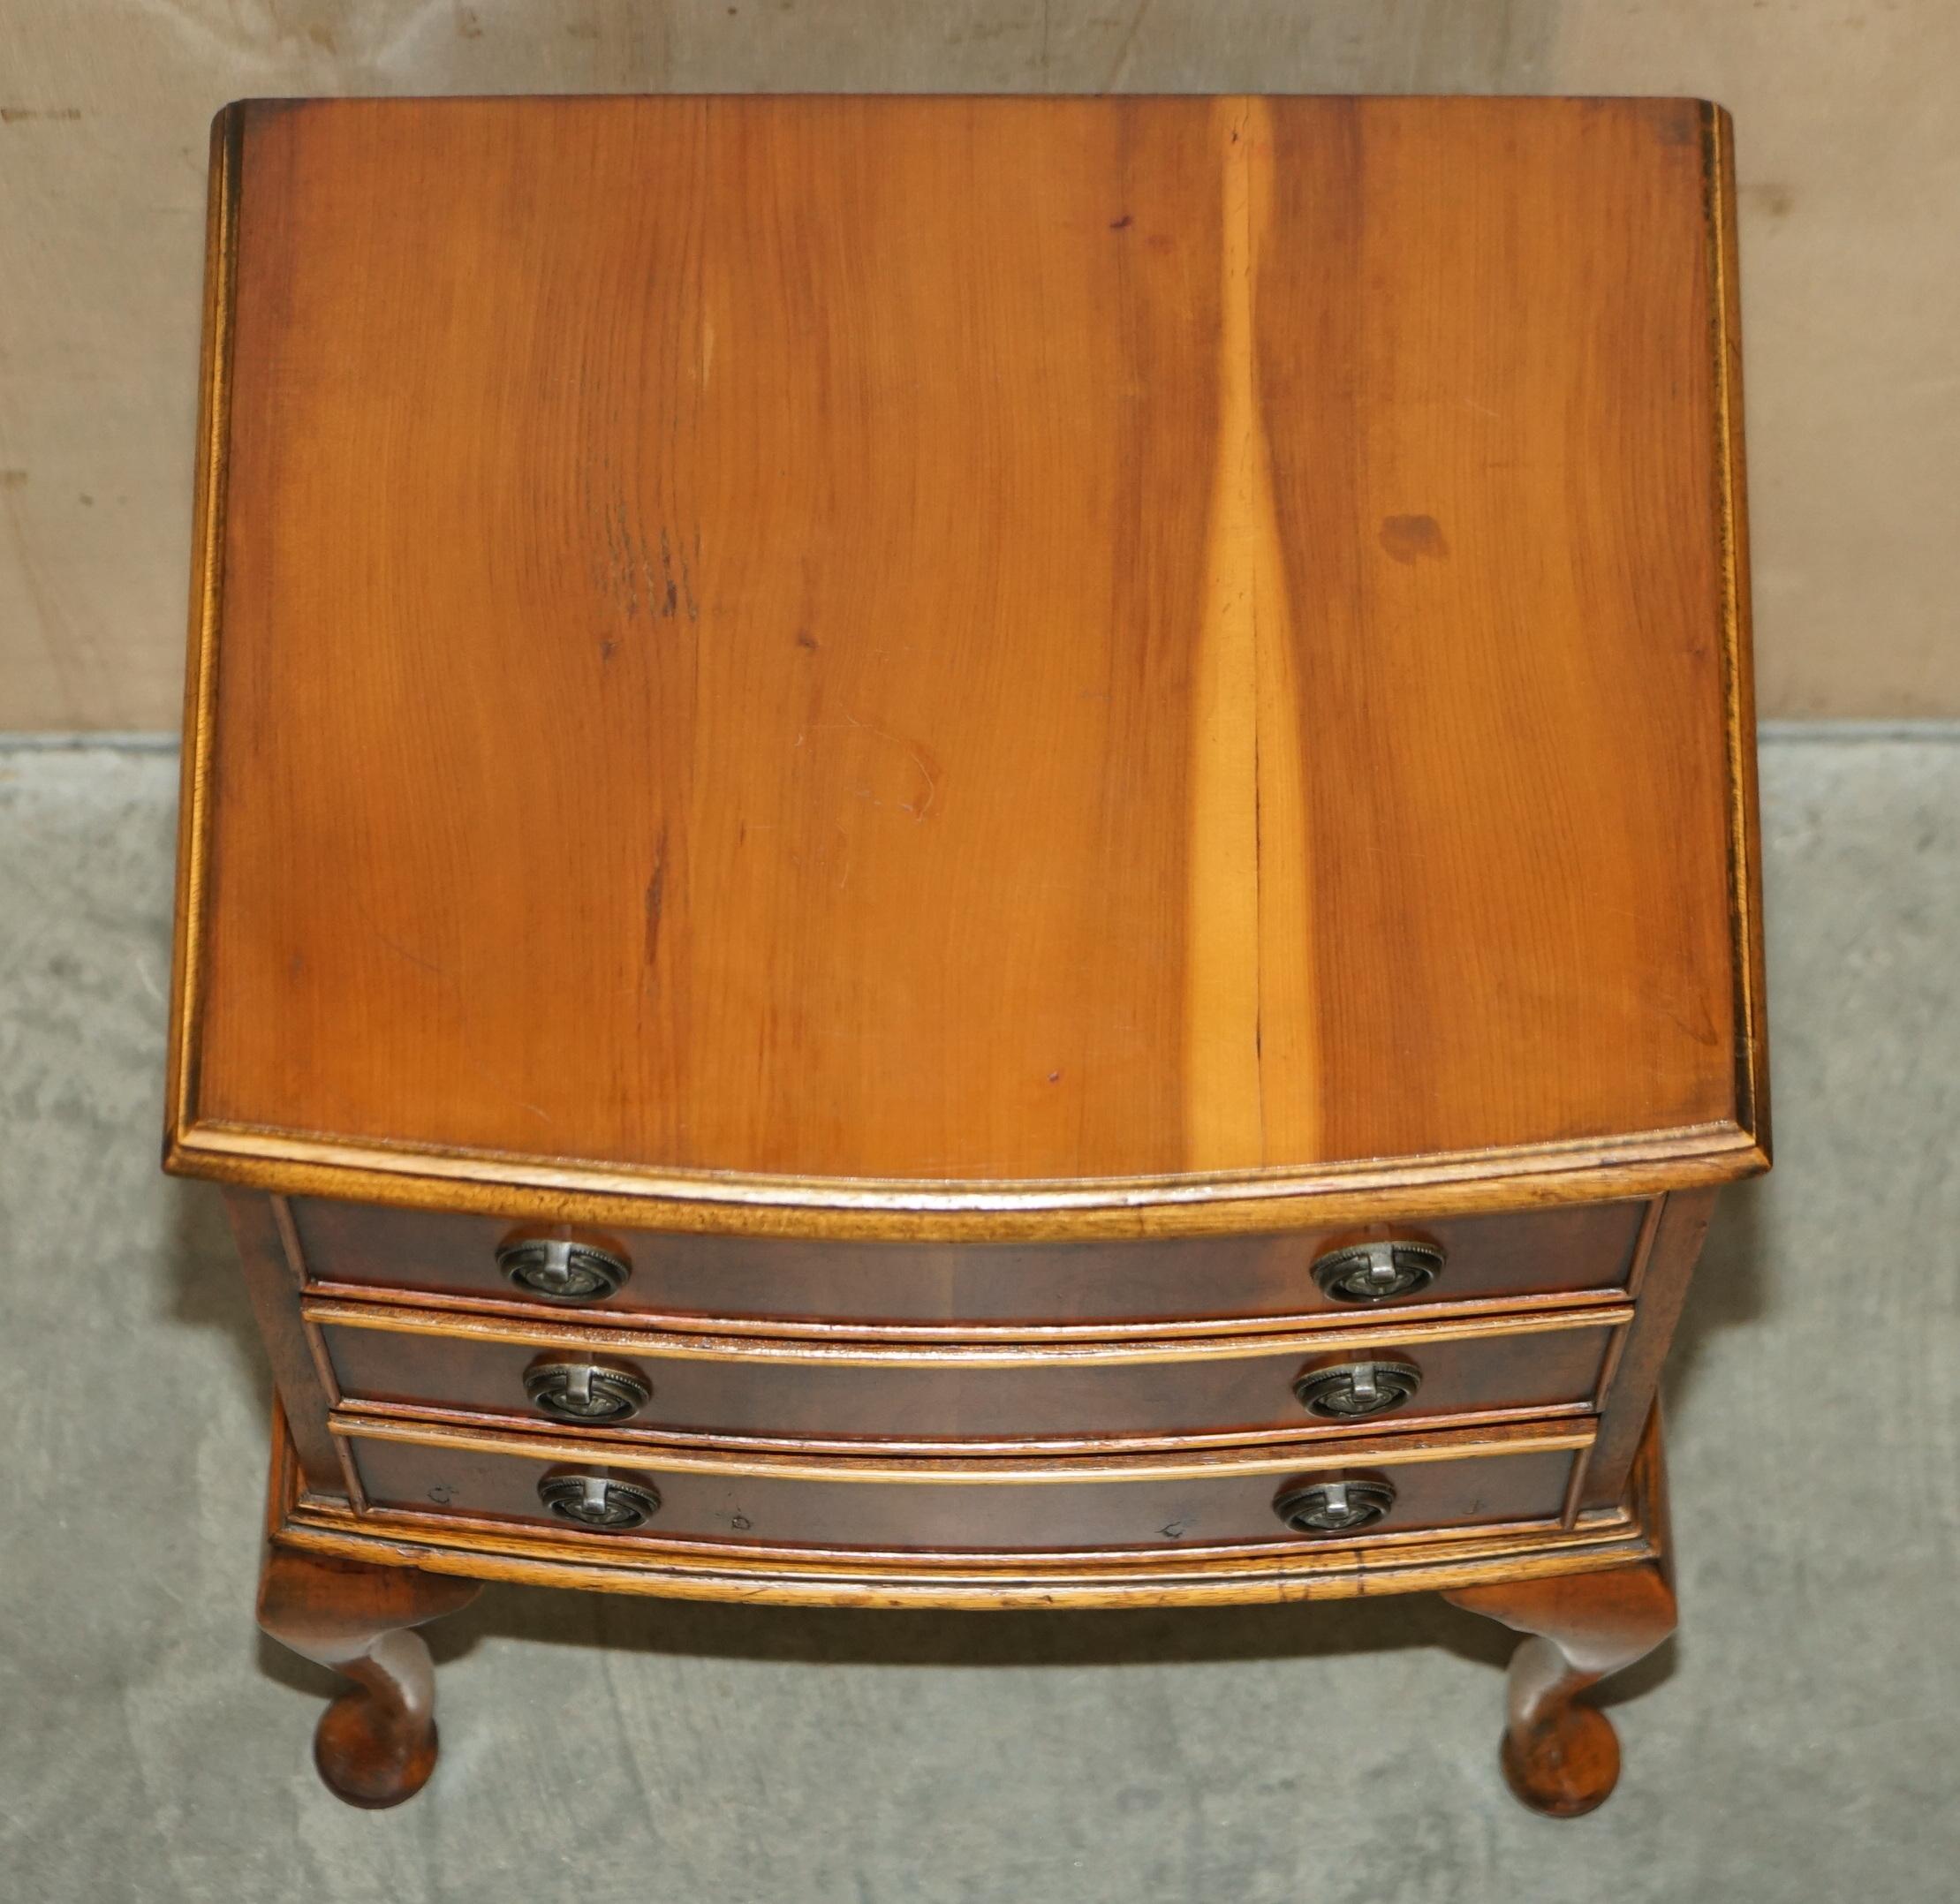 CIRCA 1940''s BURR YEW WOOD BOW FRONTED BEDSIDE SIDE TABLE CHEST OF DRAWERS im Angebot 4